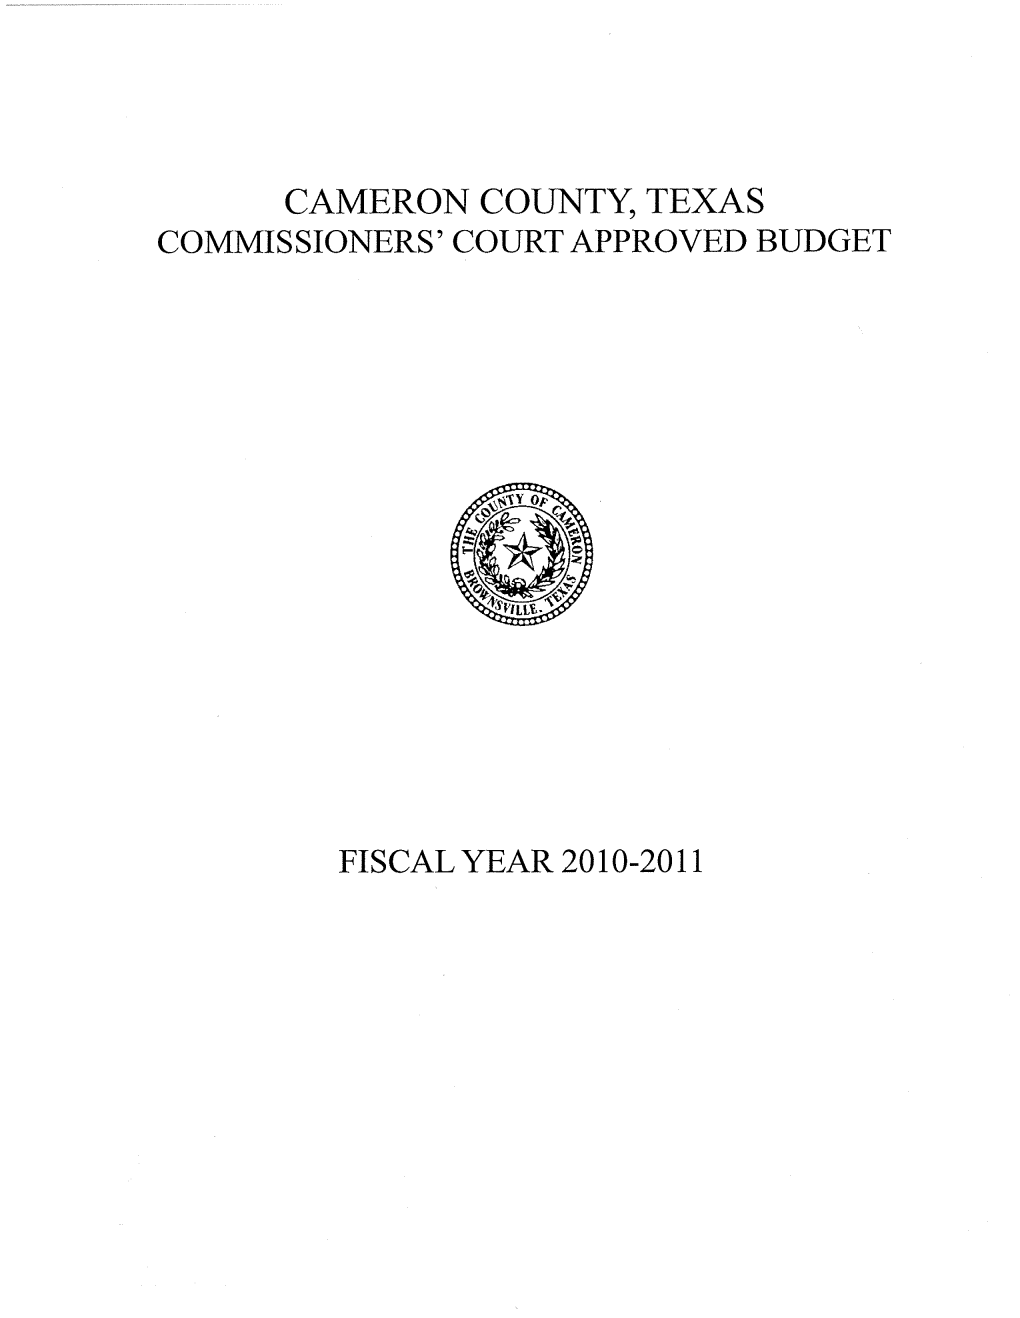 FY 2011 Approved Budget